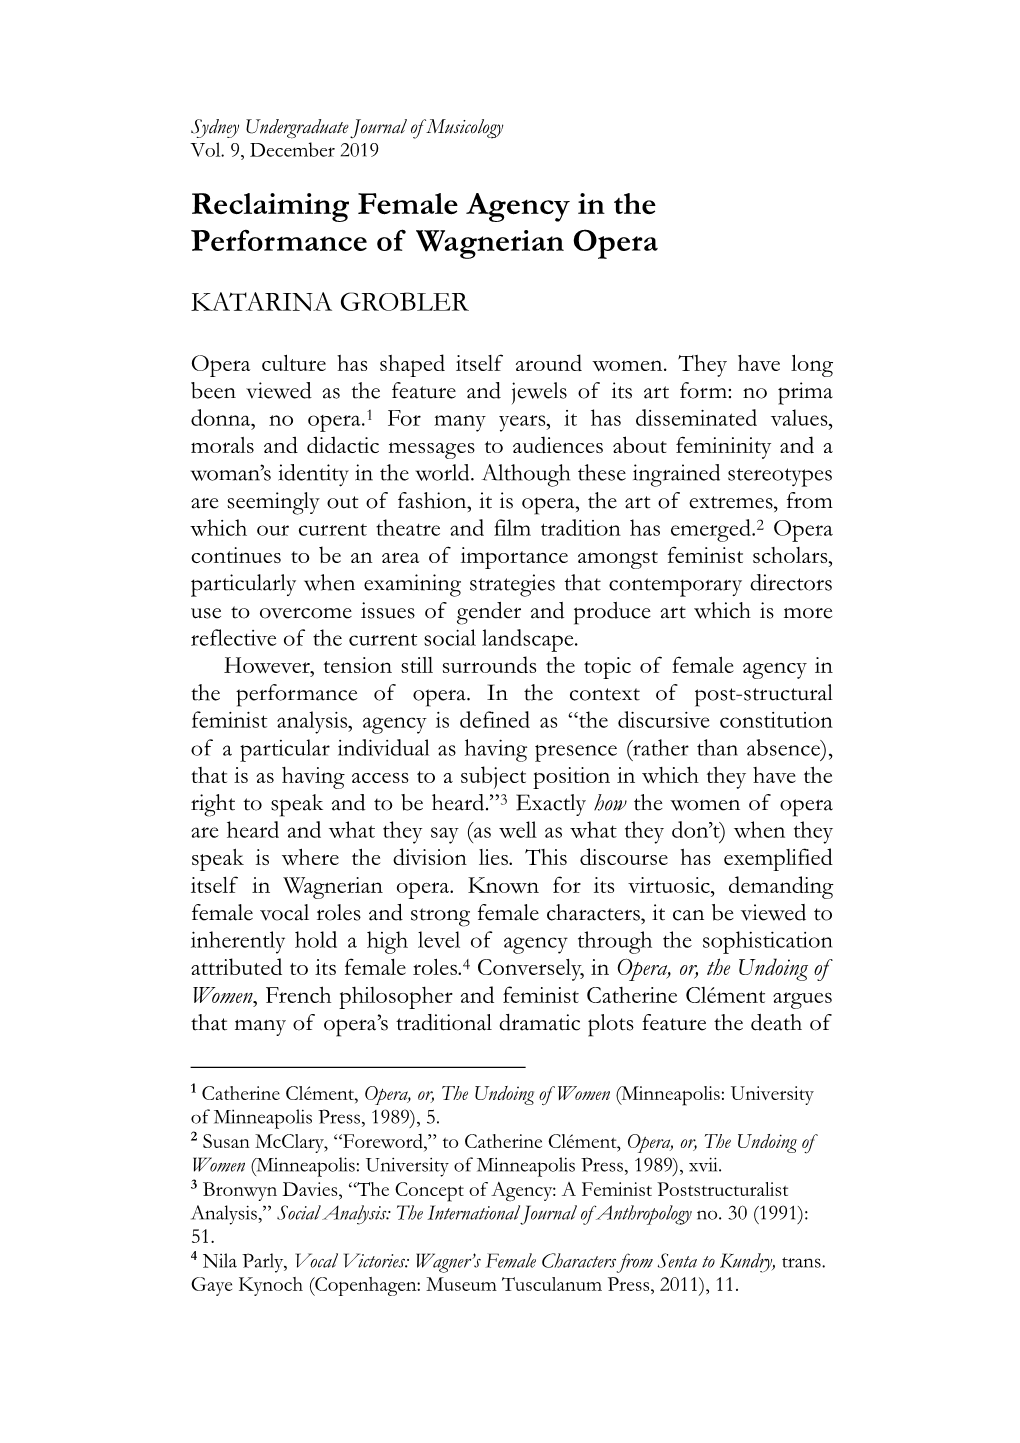 Reclaiming Female Agency in the Performance of Wagnerian Opera